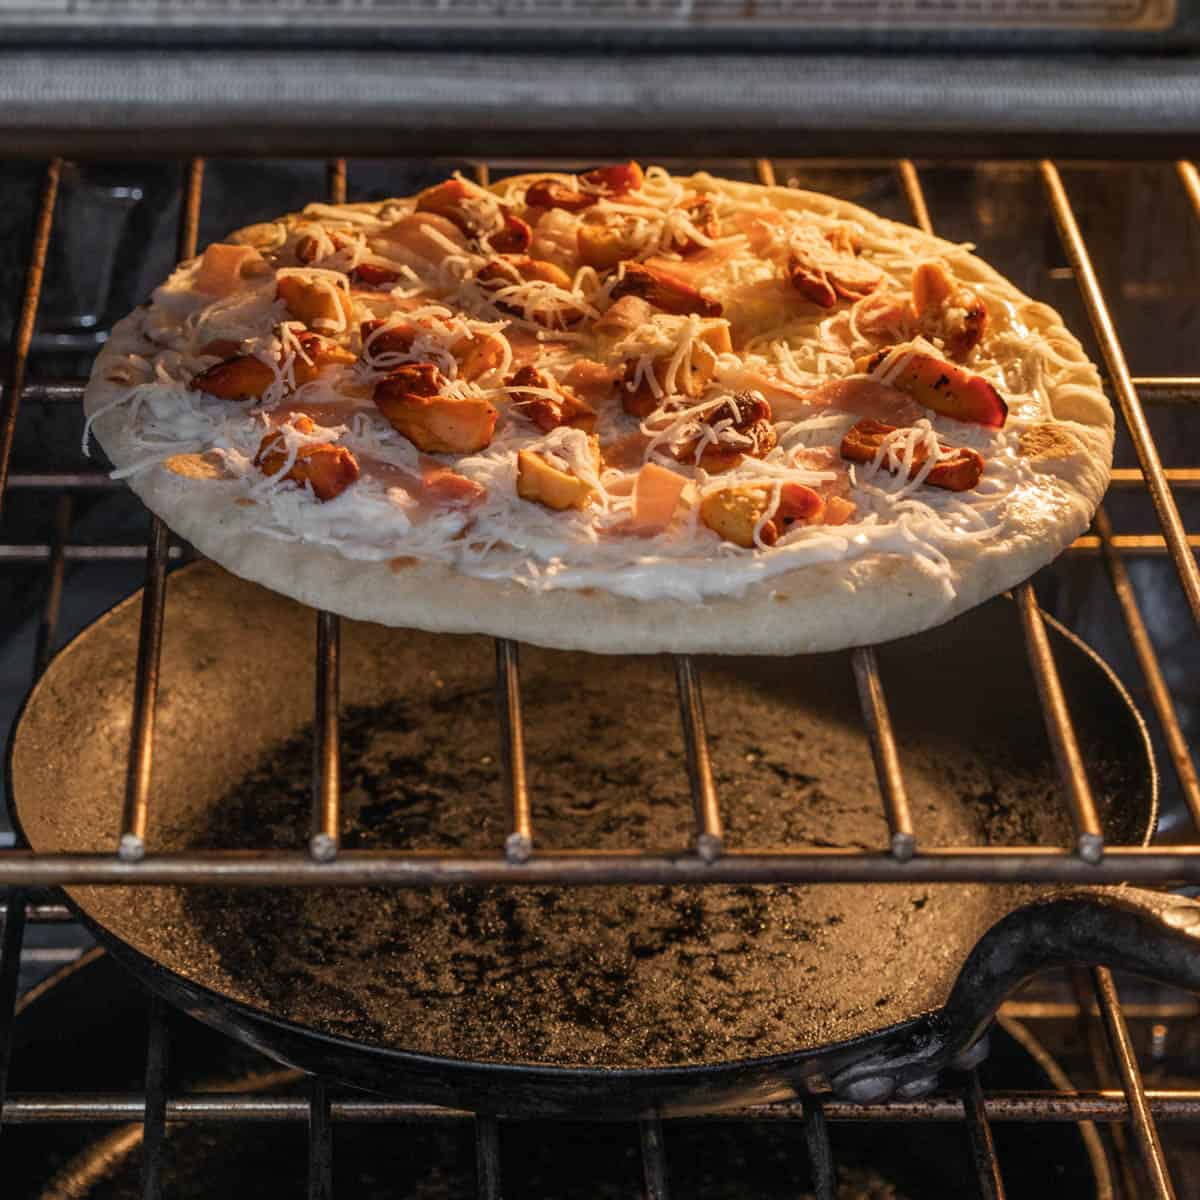 cooking a pizza in an oven on the rack